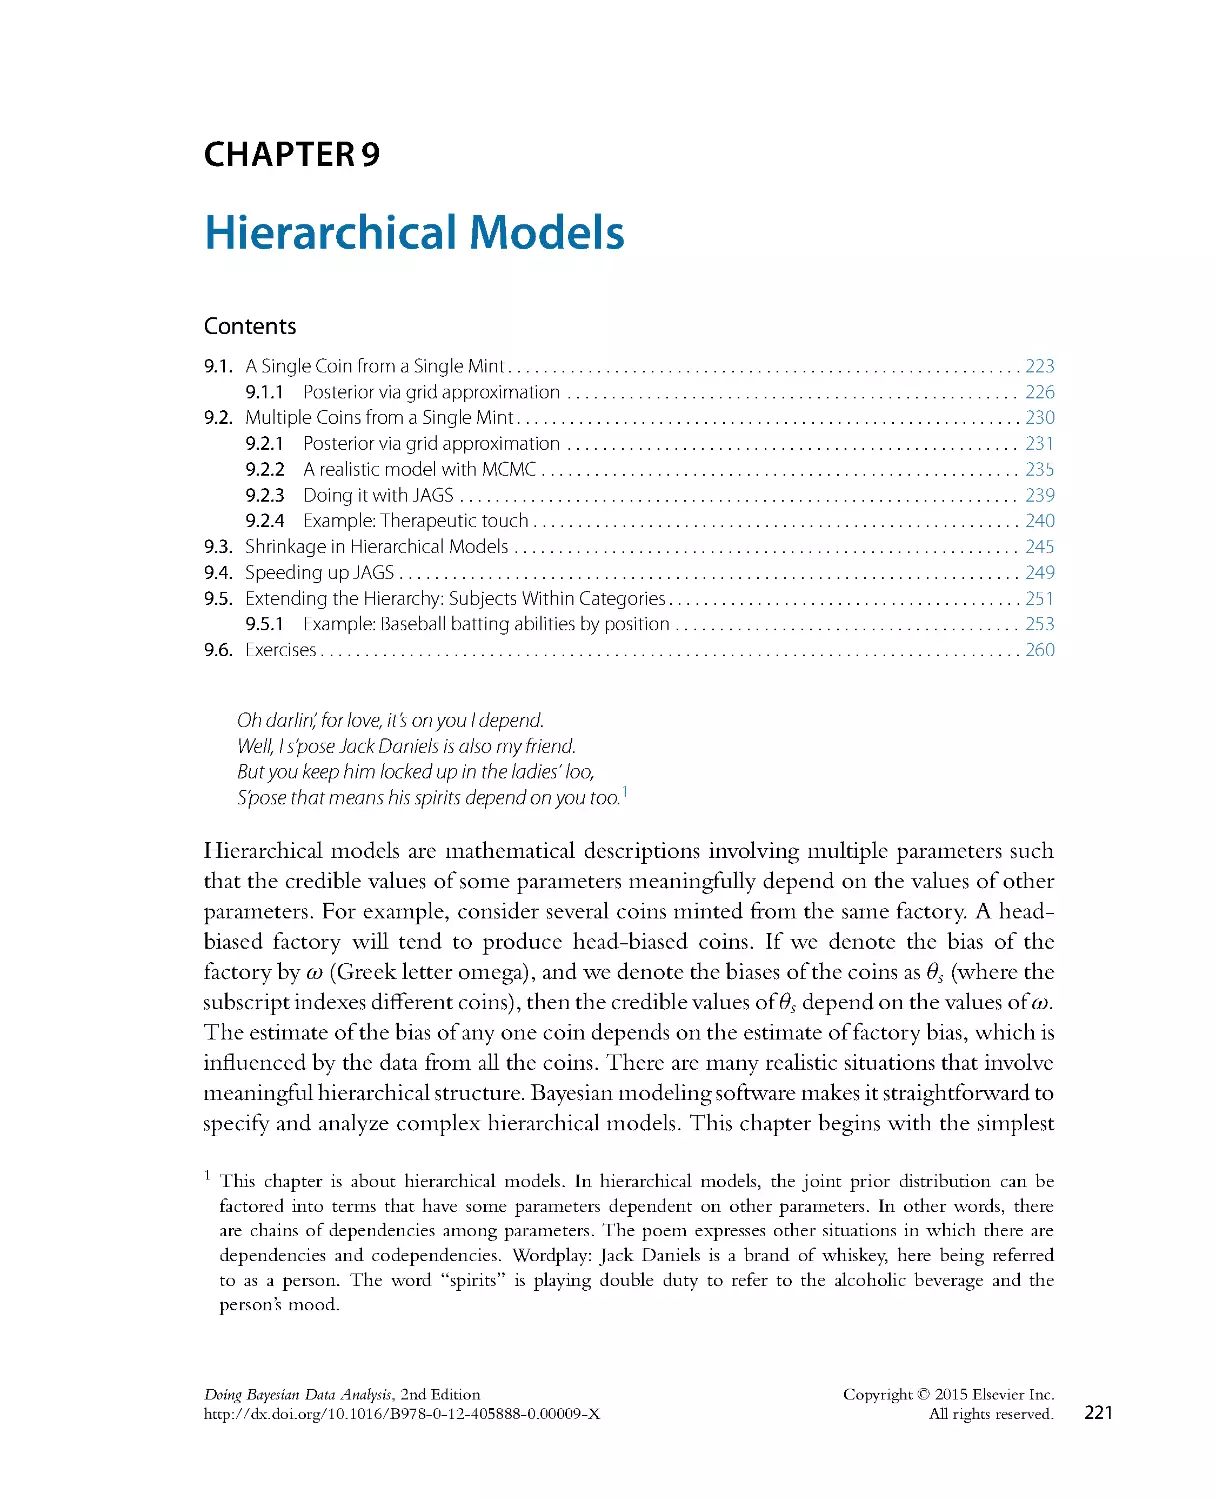 14. Chapter-9-Hierarchical-Models_2015_Doing-Bayesian-Data-Analysis-Second-Edition-